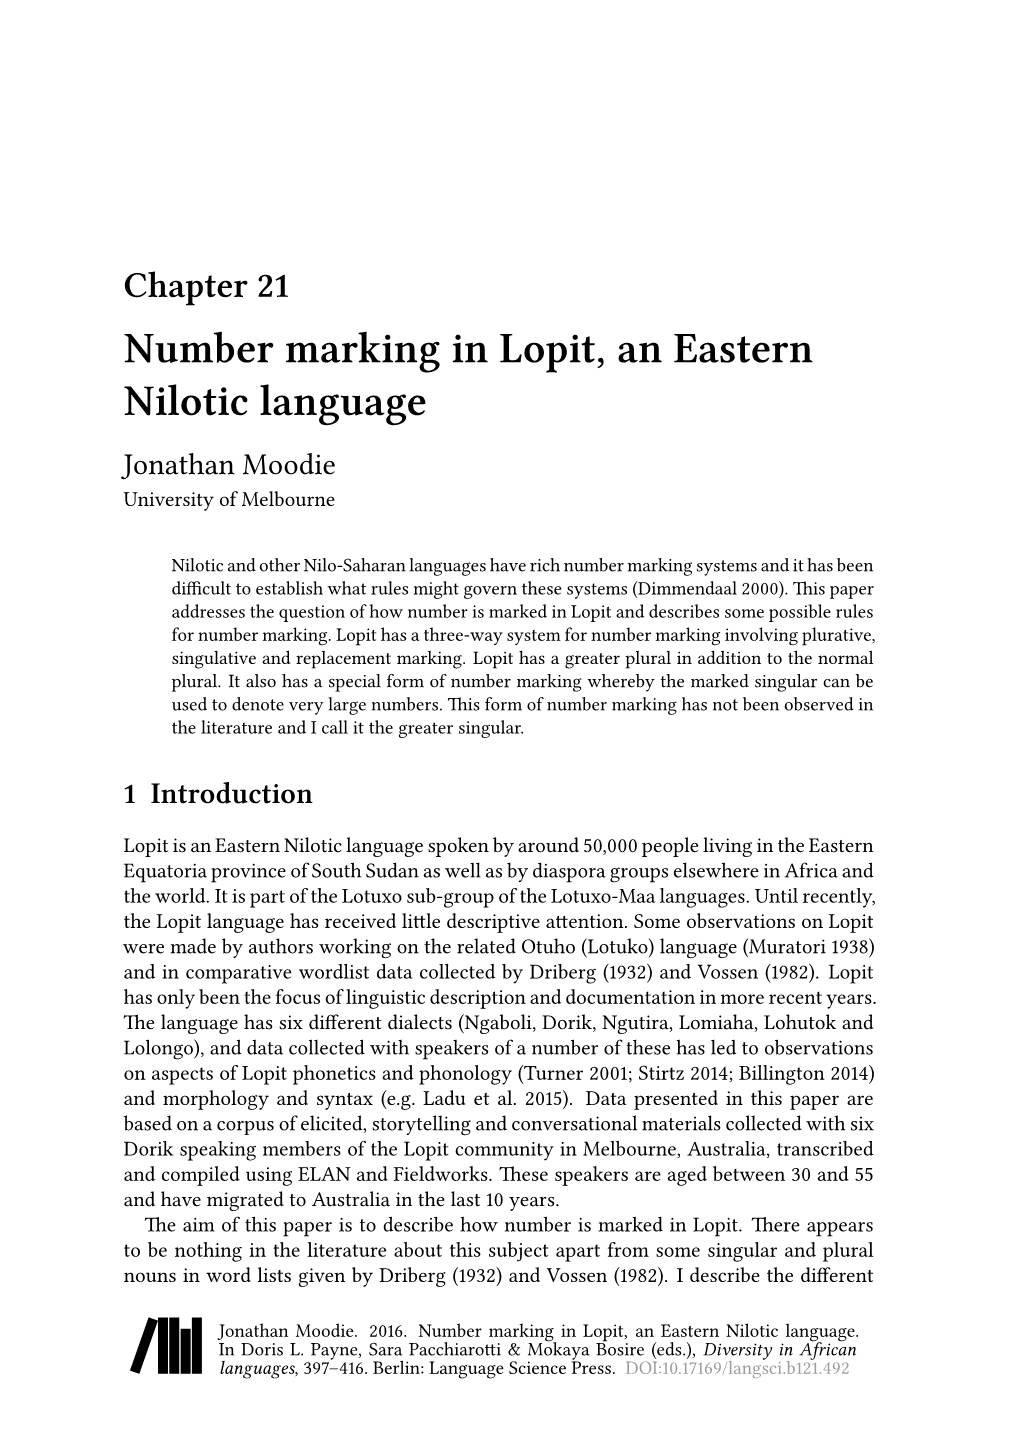 Number Marking in Lopit, an Eastern Nilotic Language Jonathan Moodie University of Melbourne